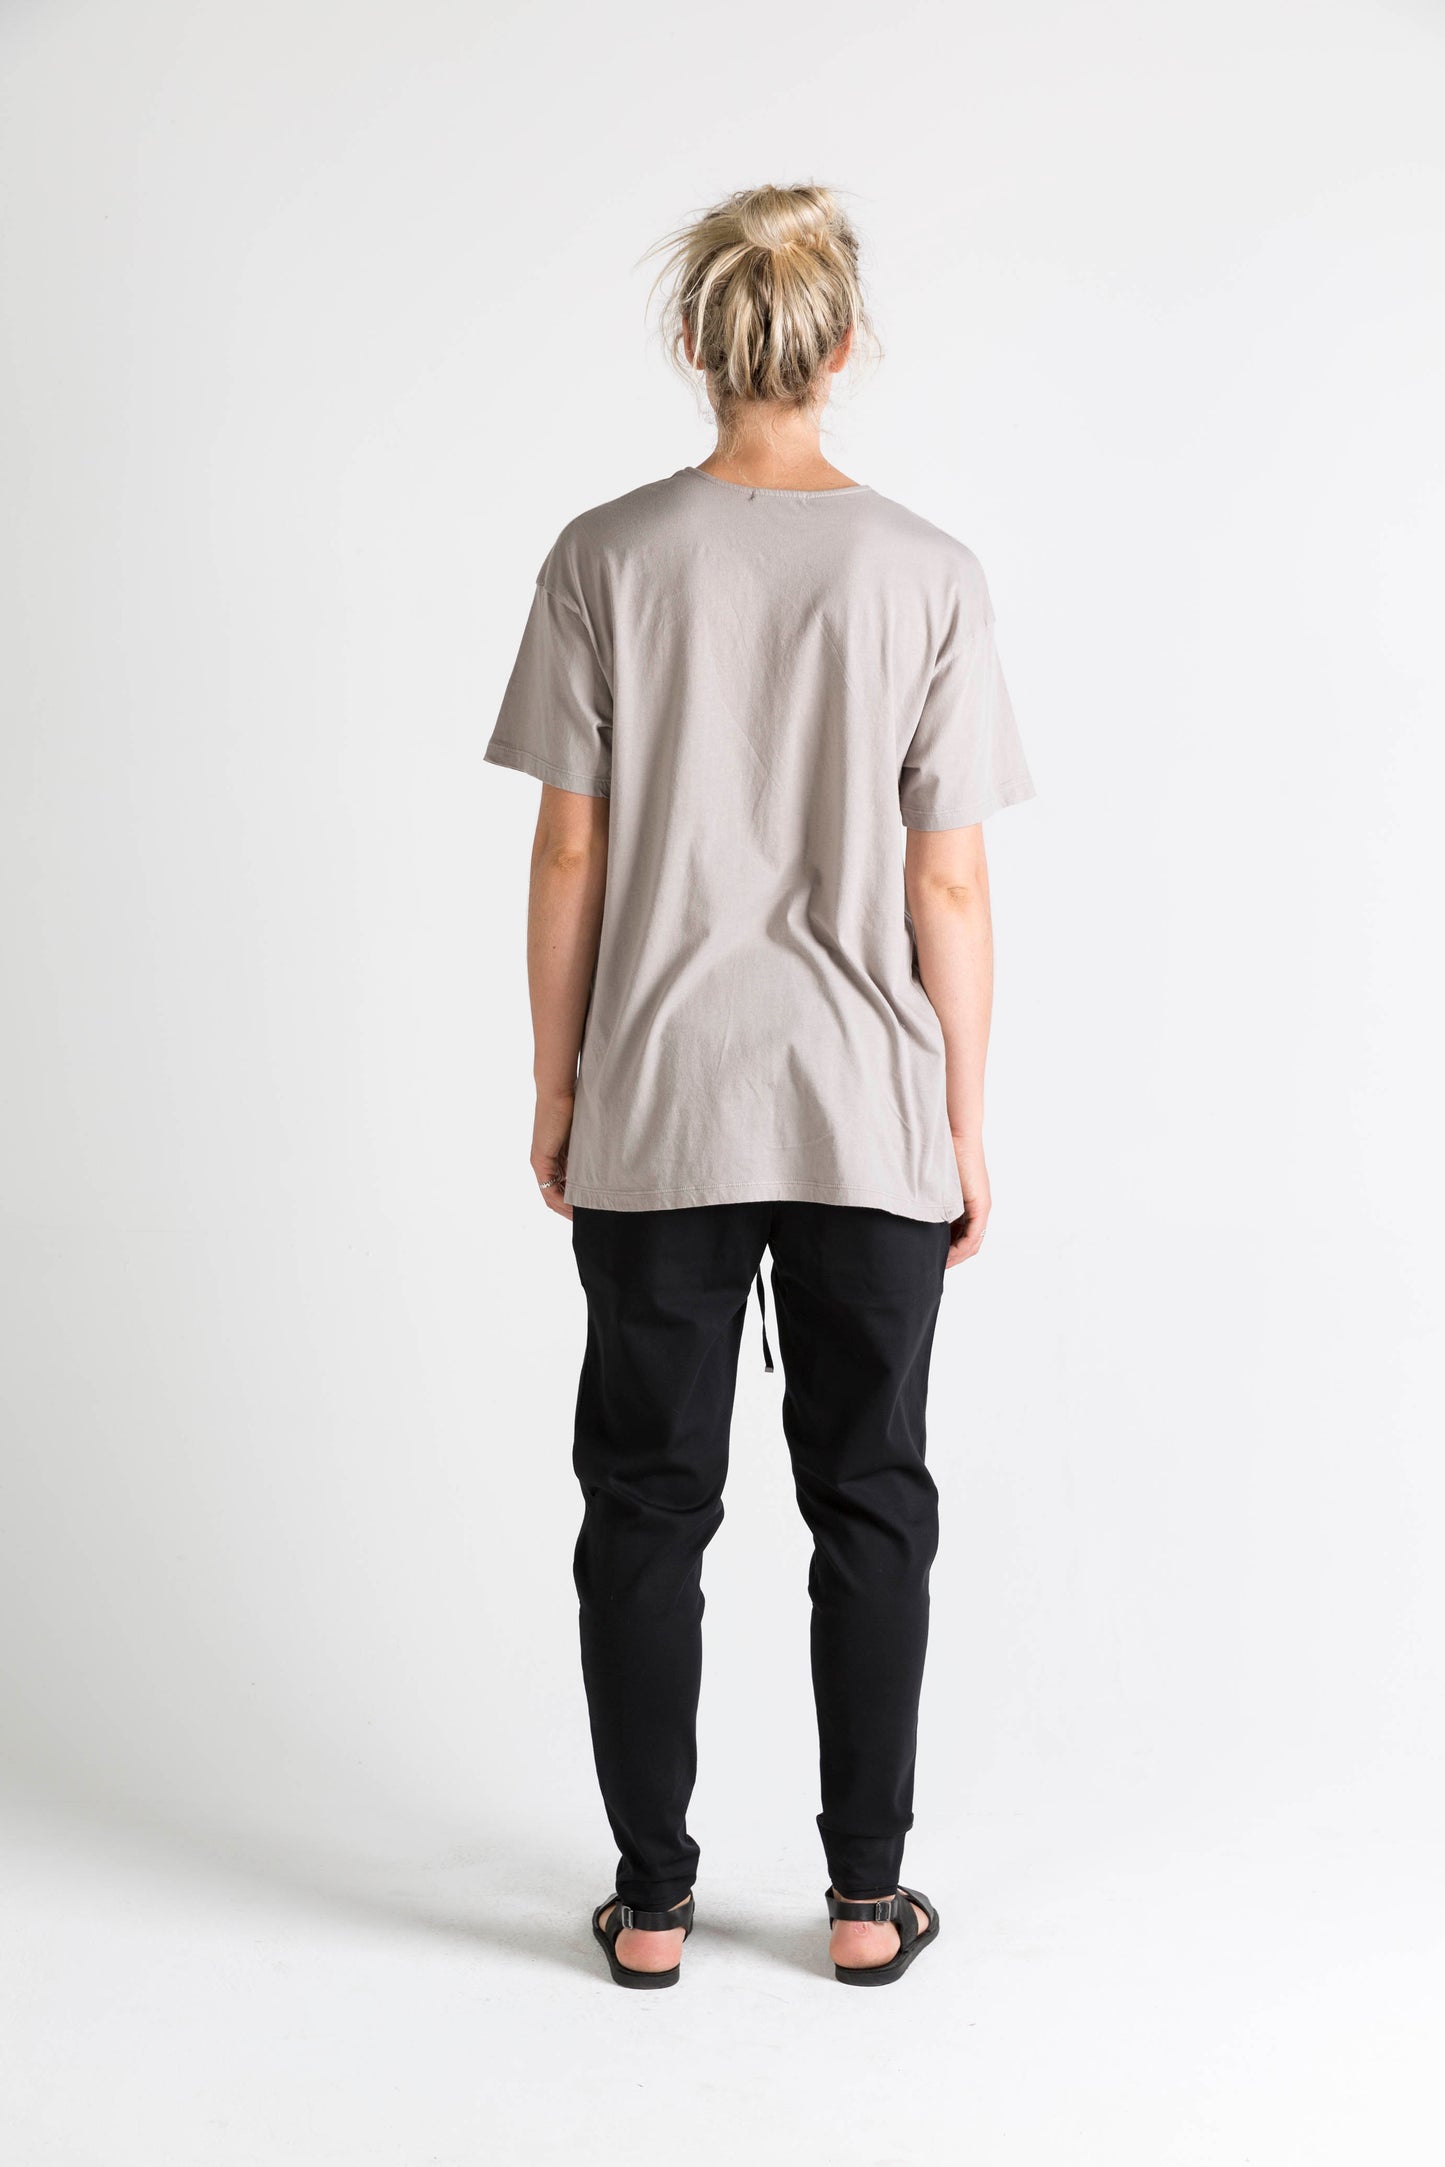 Ophelia and Ryder Short Sleeved T-Shirt